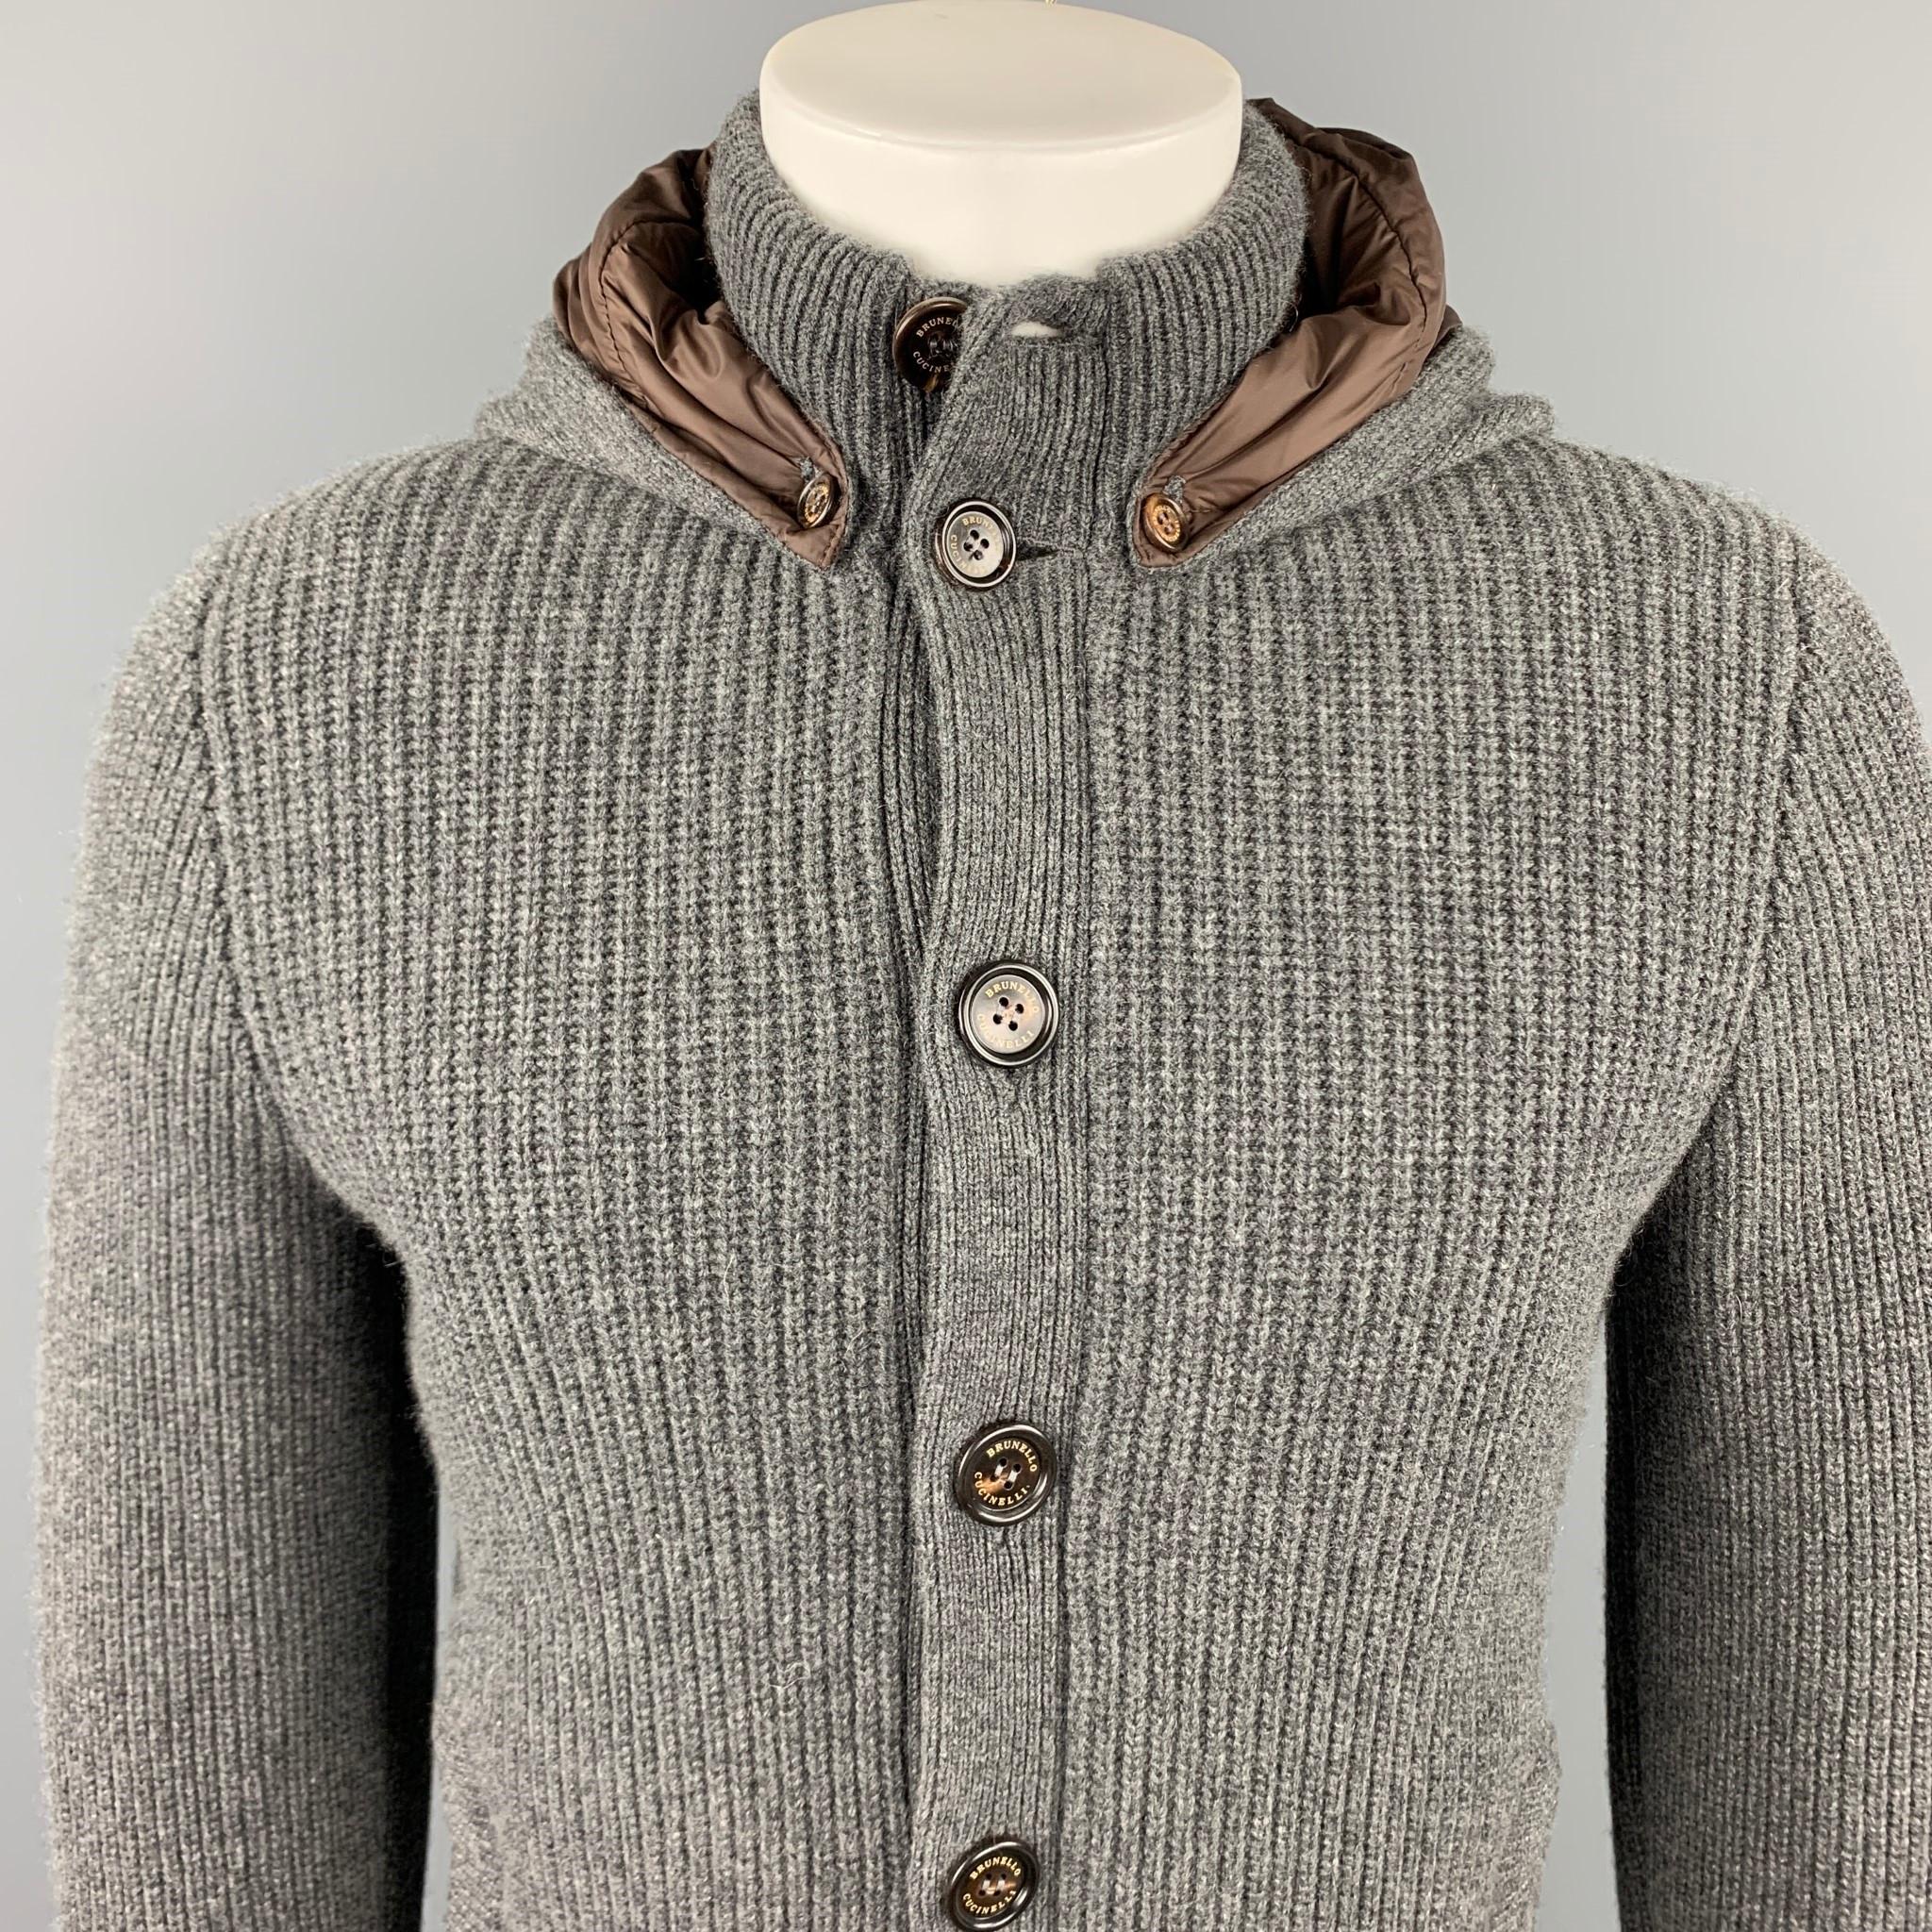 BRUNELLO CUCINELLI jacket comes in a dark gray knitted cashmere featuring a detachable hood, slit pockets, and a buttoned closure. Made in Italy.

Very Good Pre-Owned Condition.
Marked: IT 50

Measurements:

Shoulder: 17.5 in.
Chest: 38 in.
Sleeve: